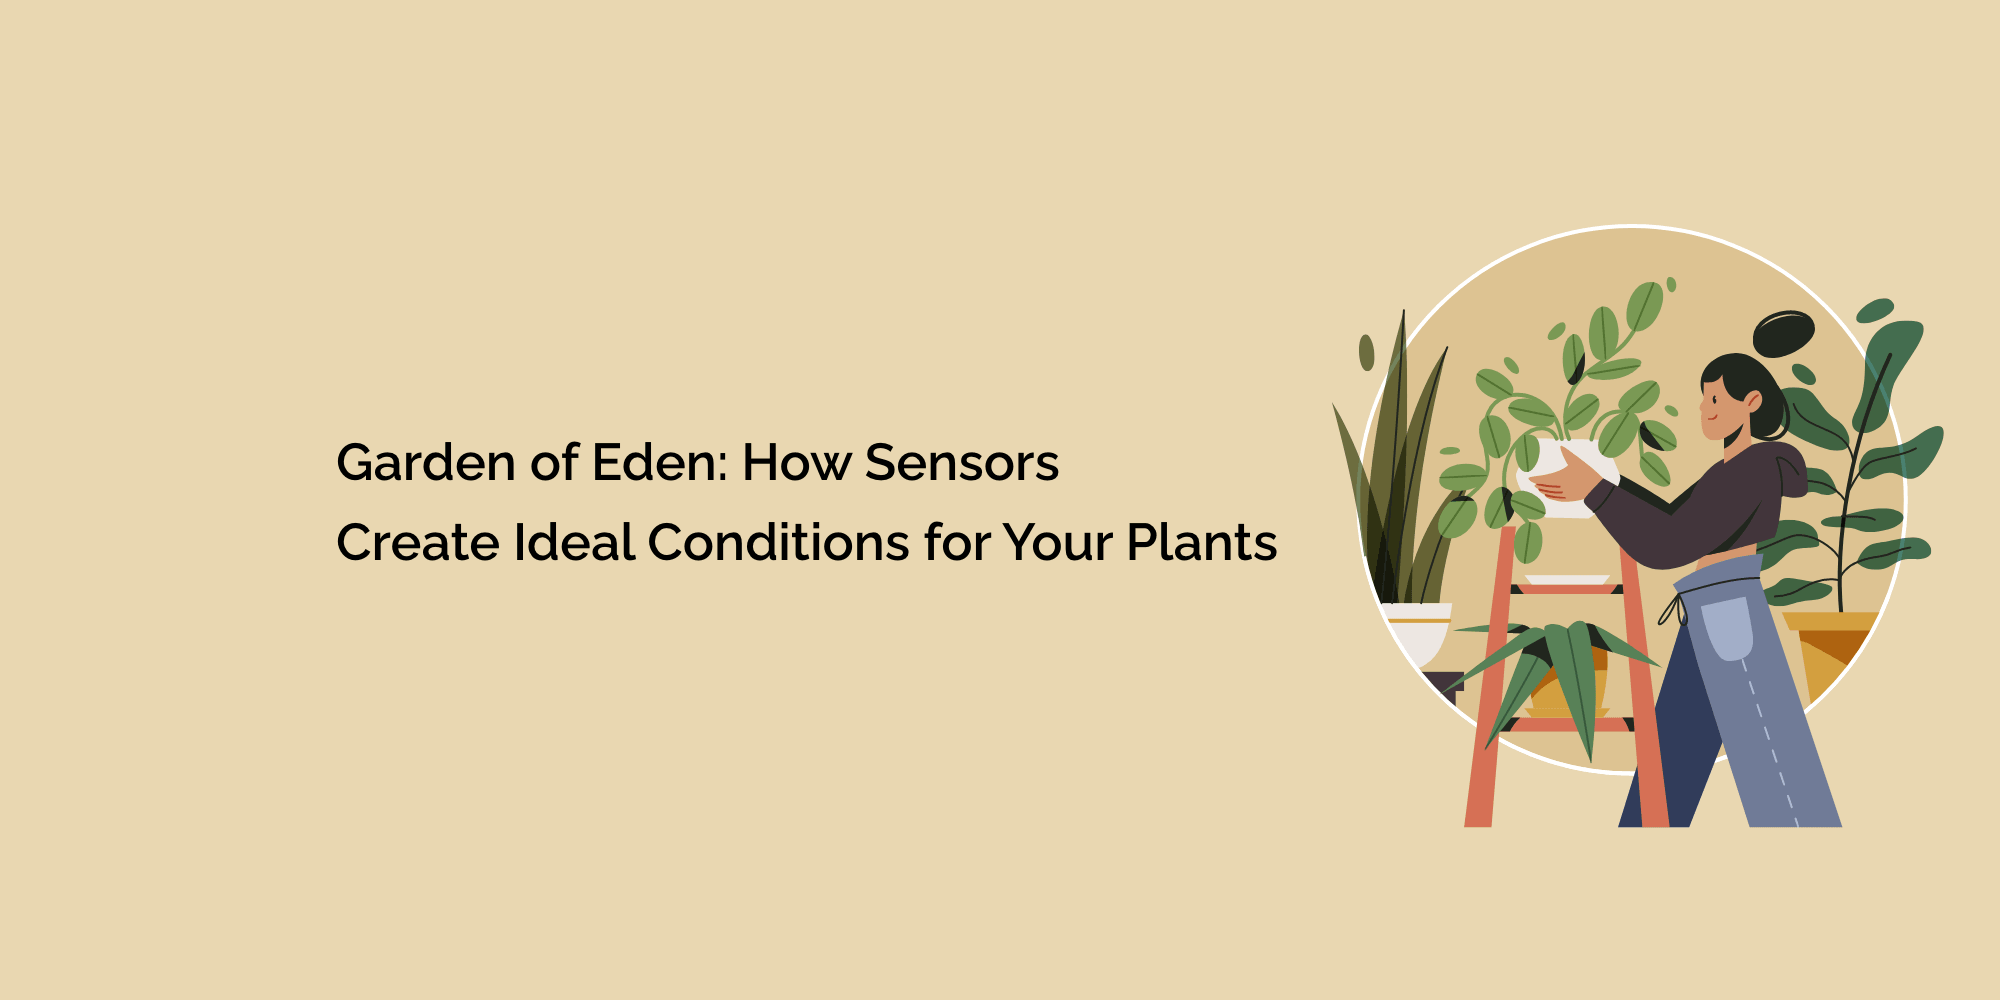 Garden of Eden: How Sensors Create Ideal Conditions for Your Plants